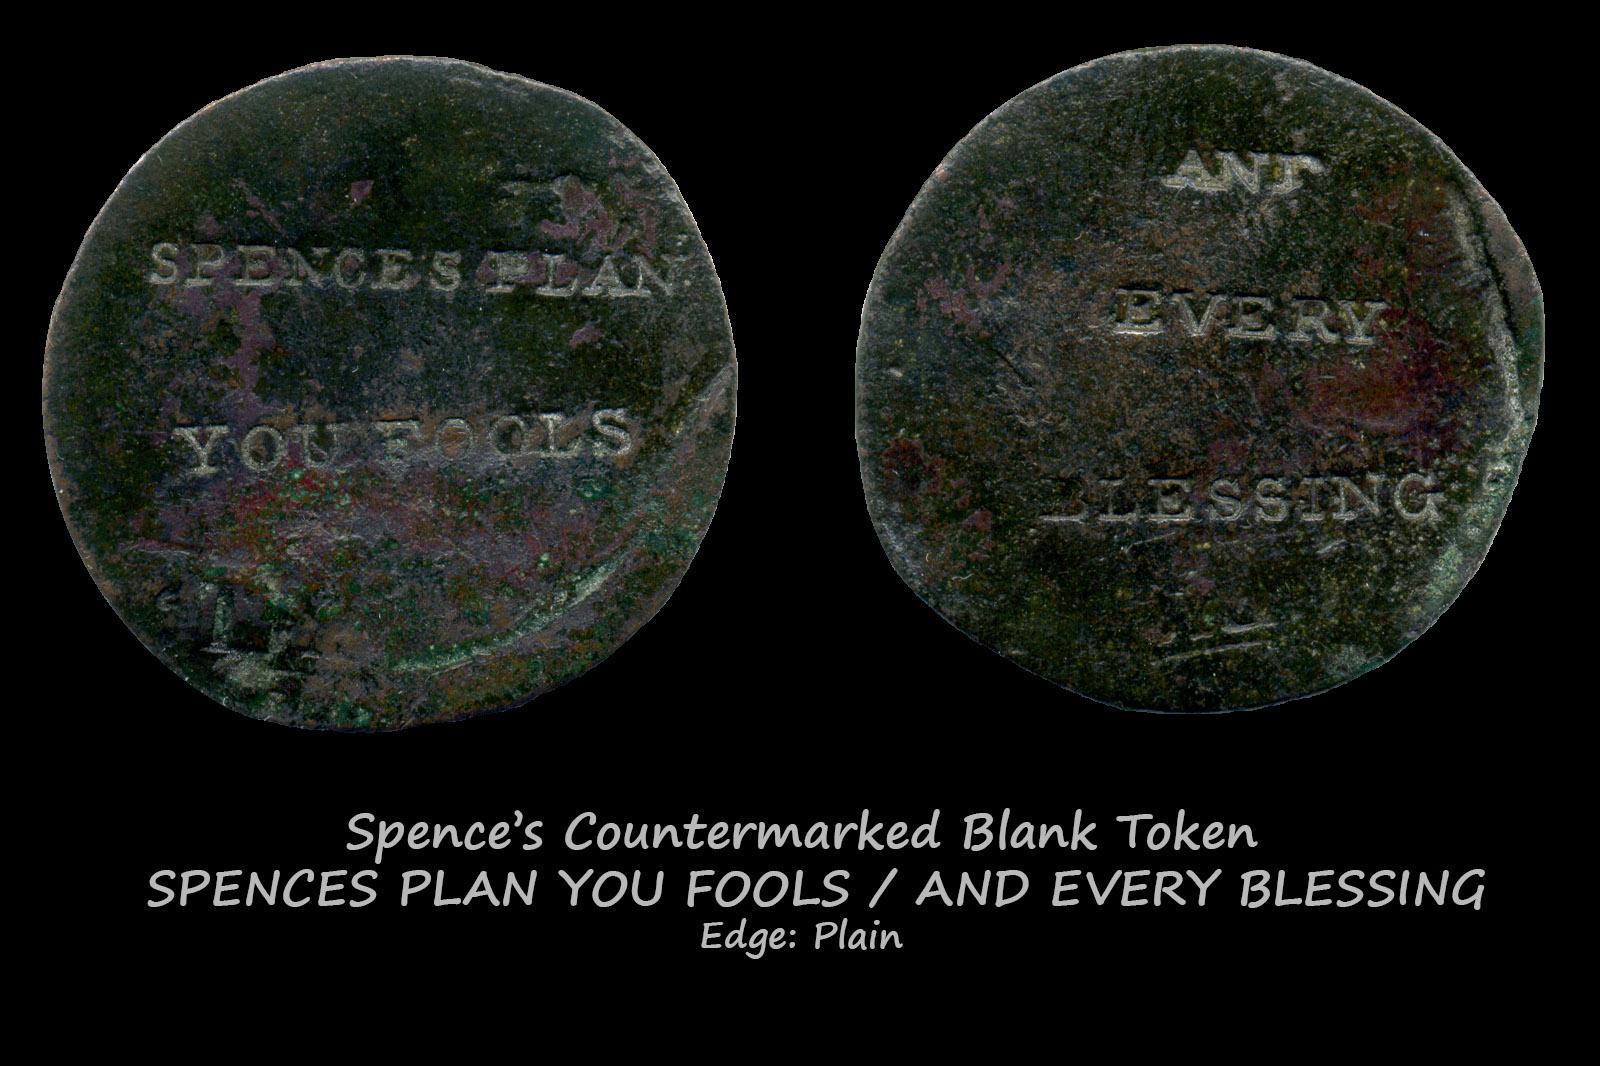 Spence’s Countermarked Tokens
SPENCE'S PLAN YOU FOOLS AND EVERY BLESSING